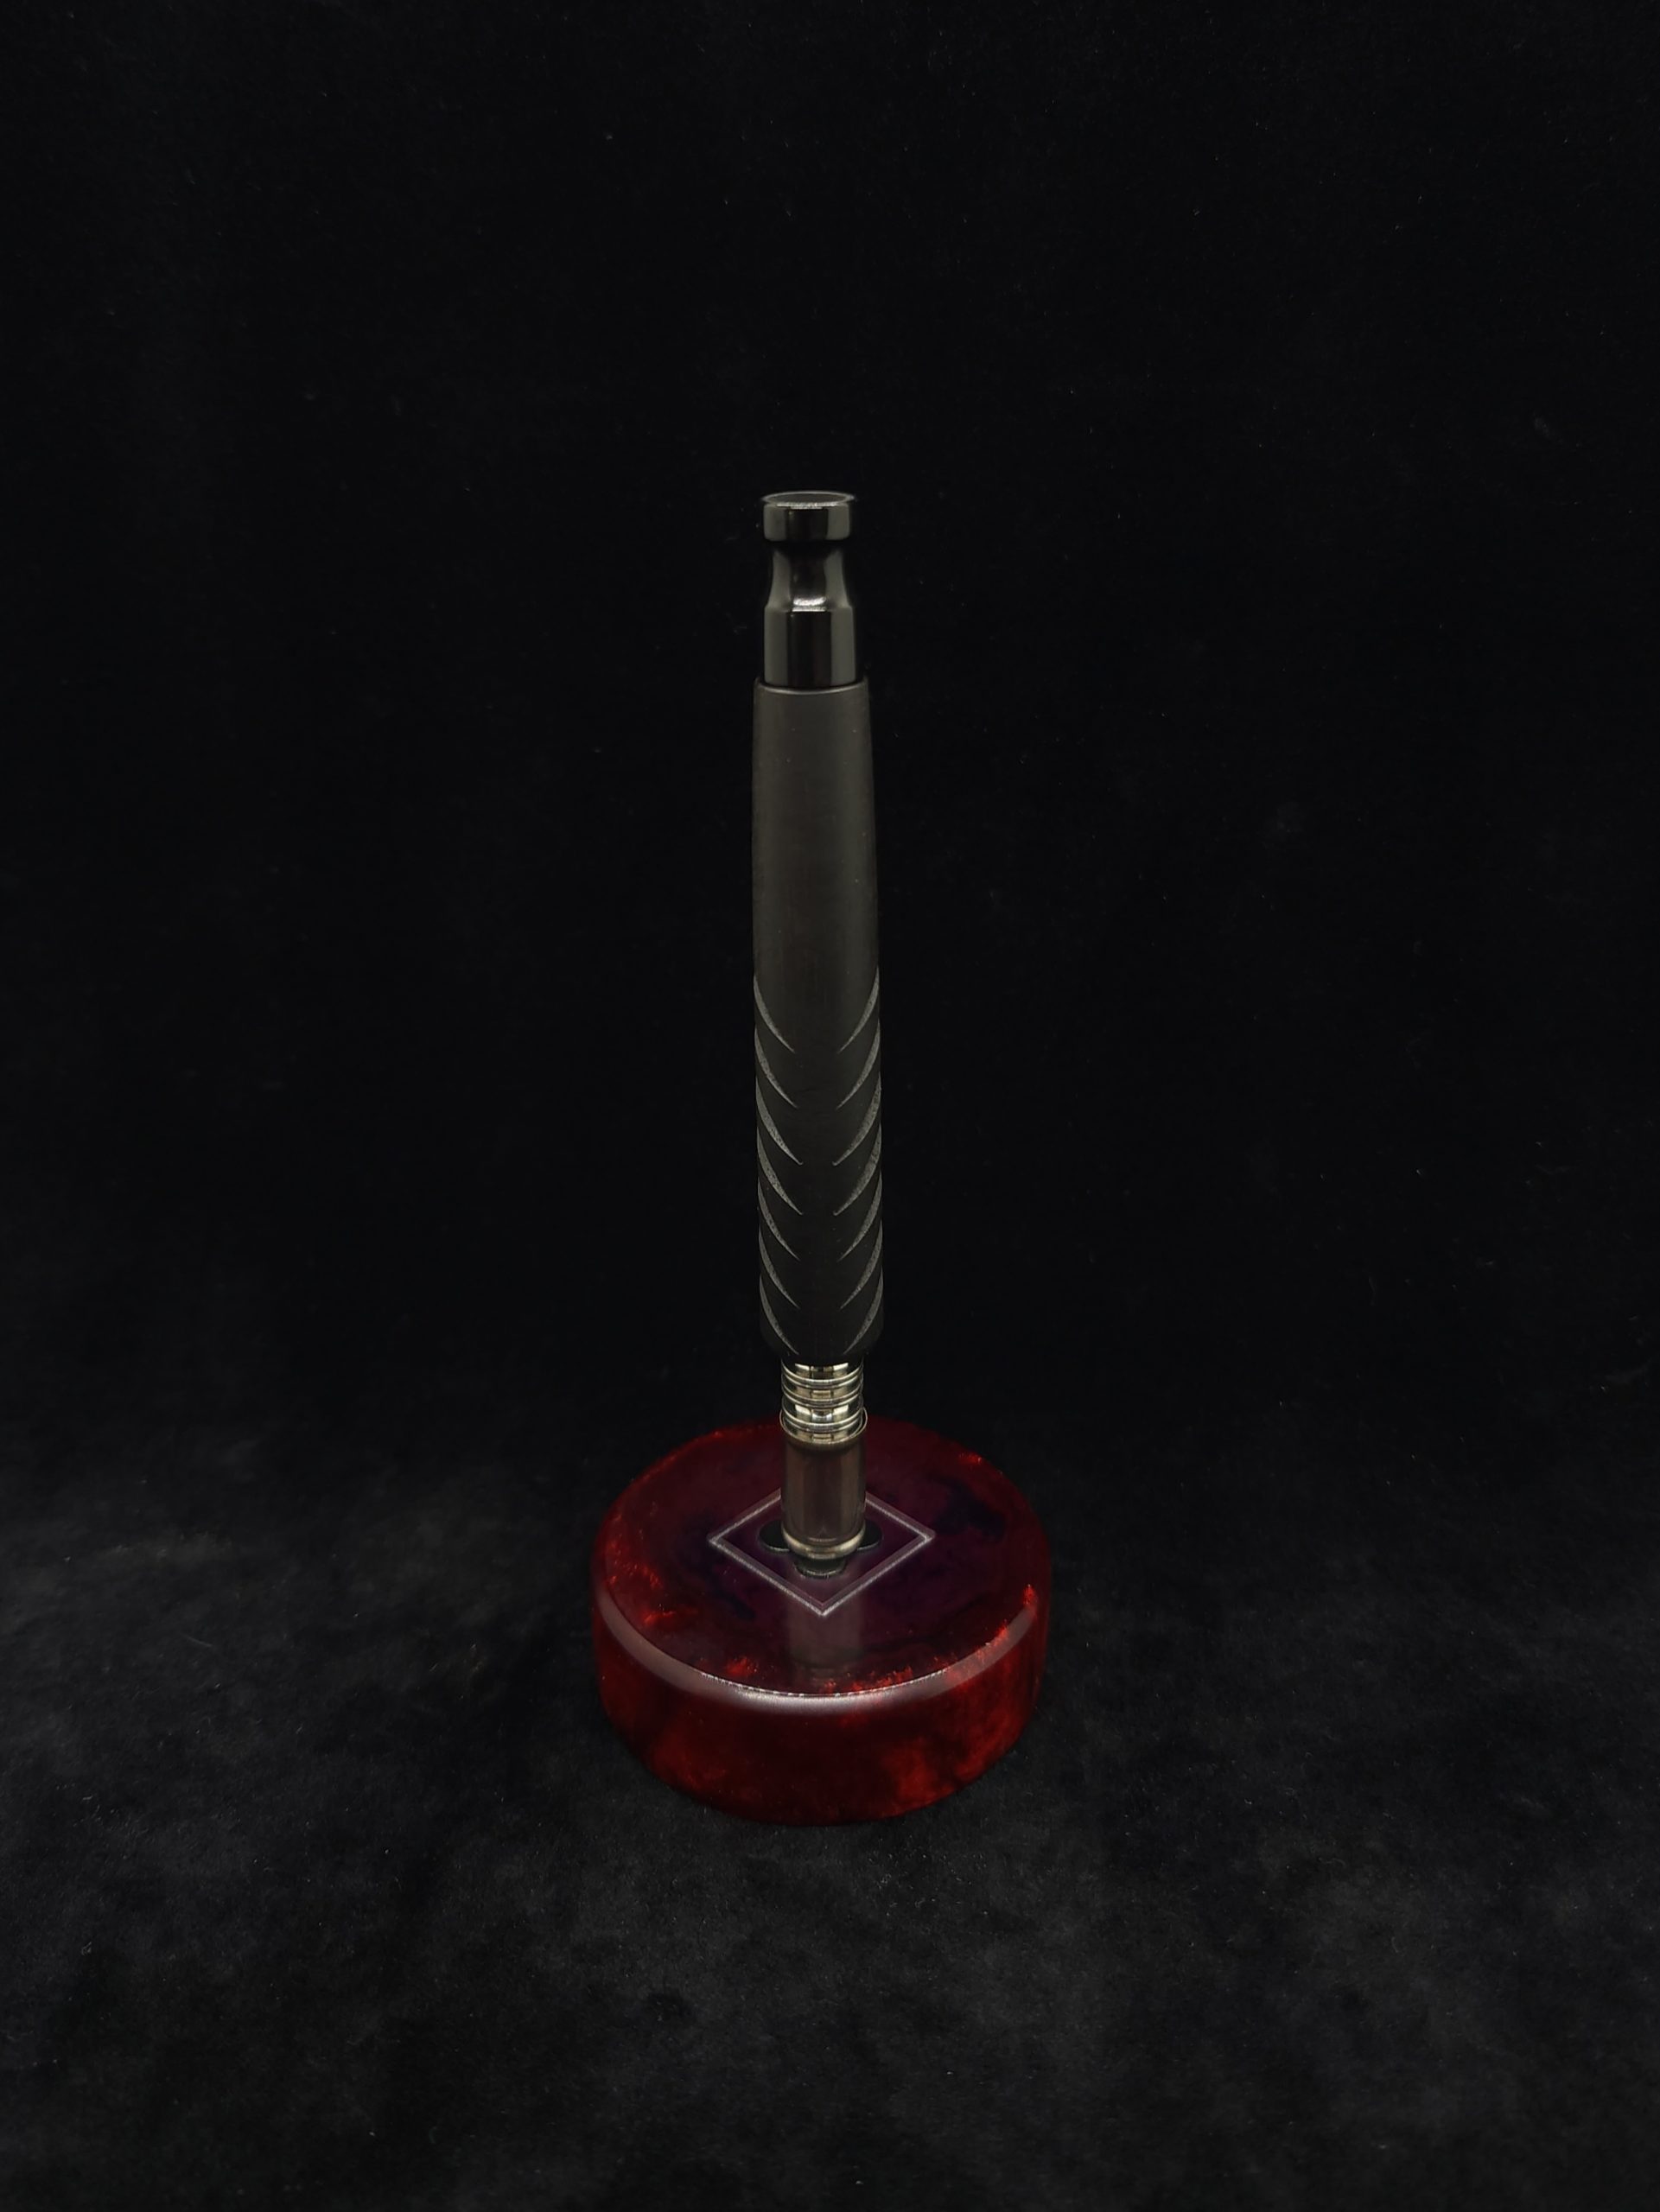 This image portrays Reaper XL Dynavap Stem/Matte Ebony Wood + Gloss Black Mouthpiece by Dovetail Woodwork.